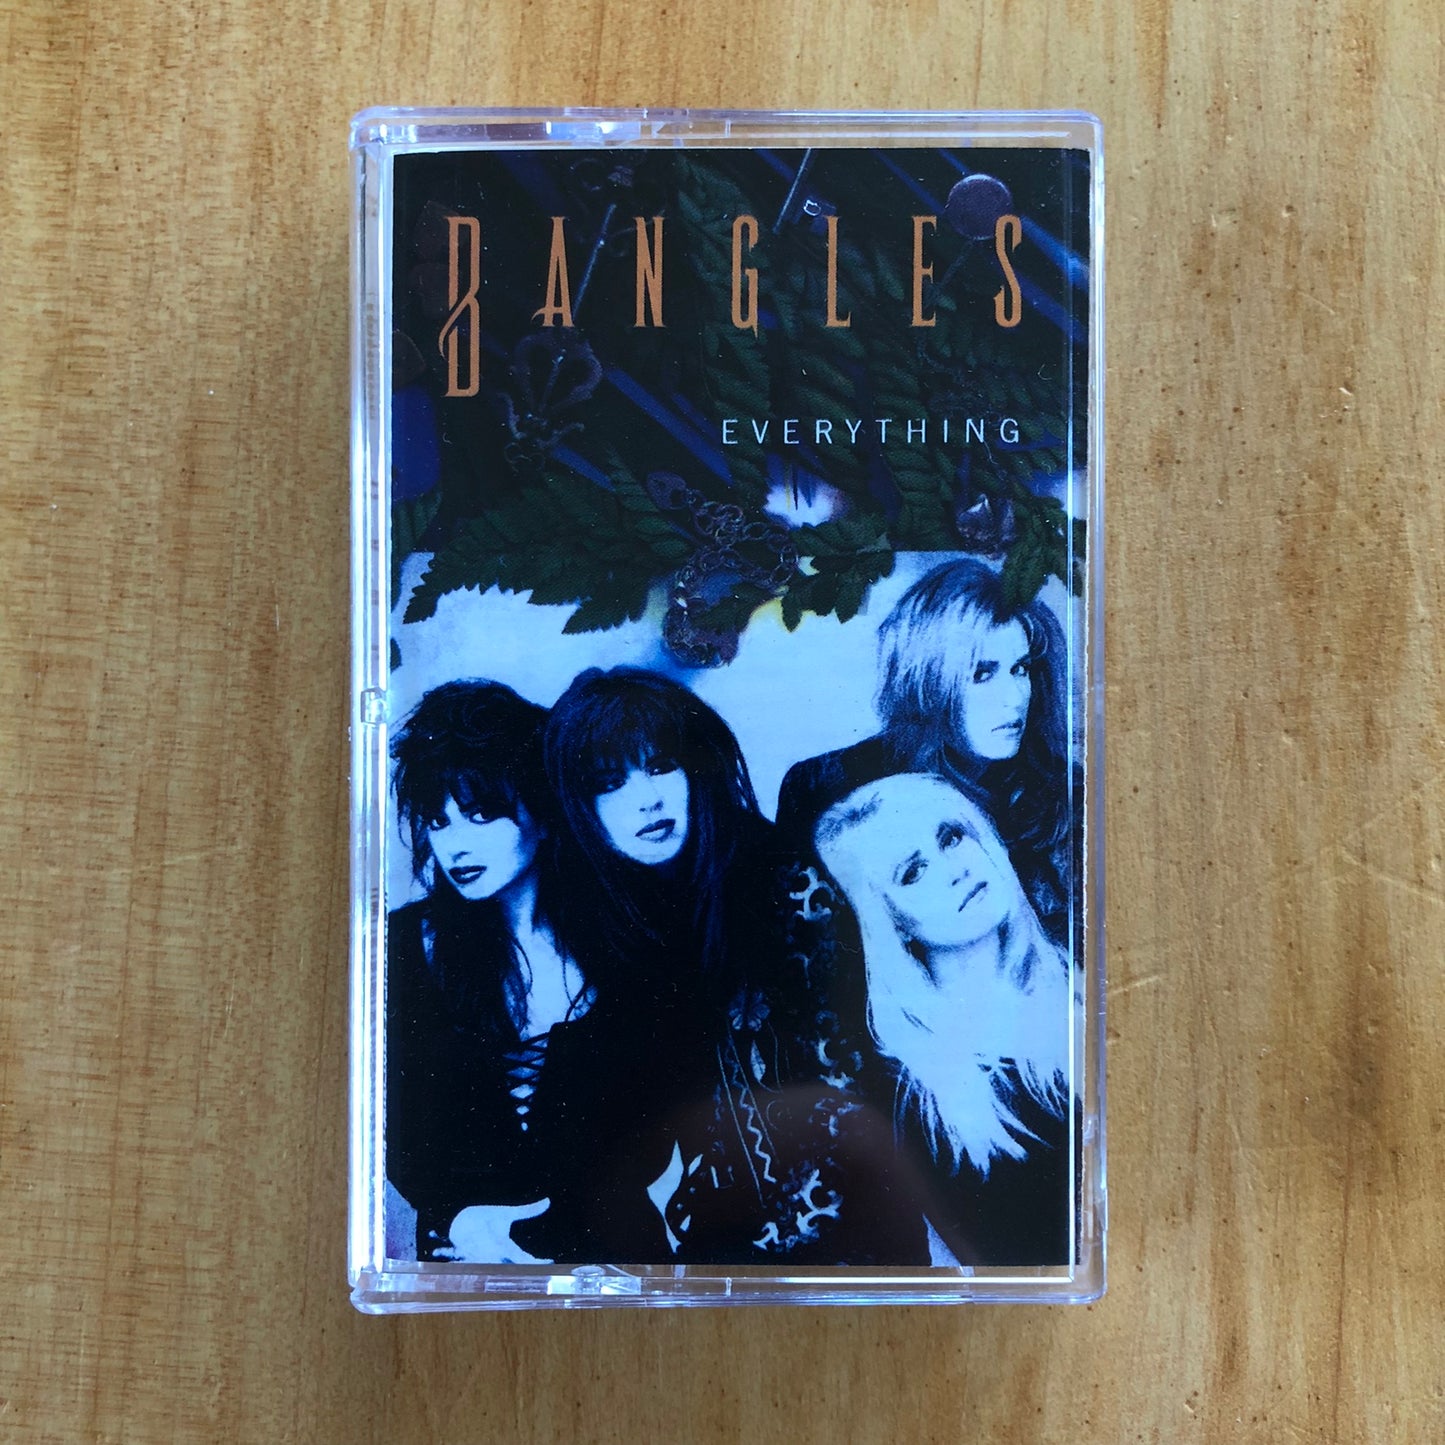 The Bangles - Everything (cassette)